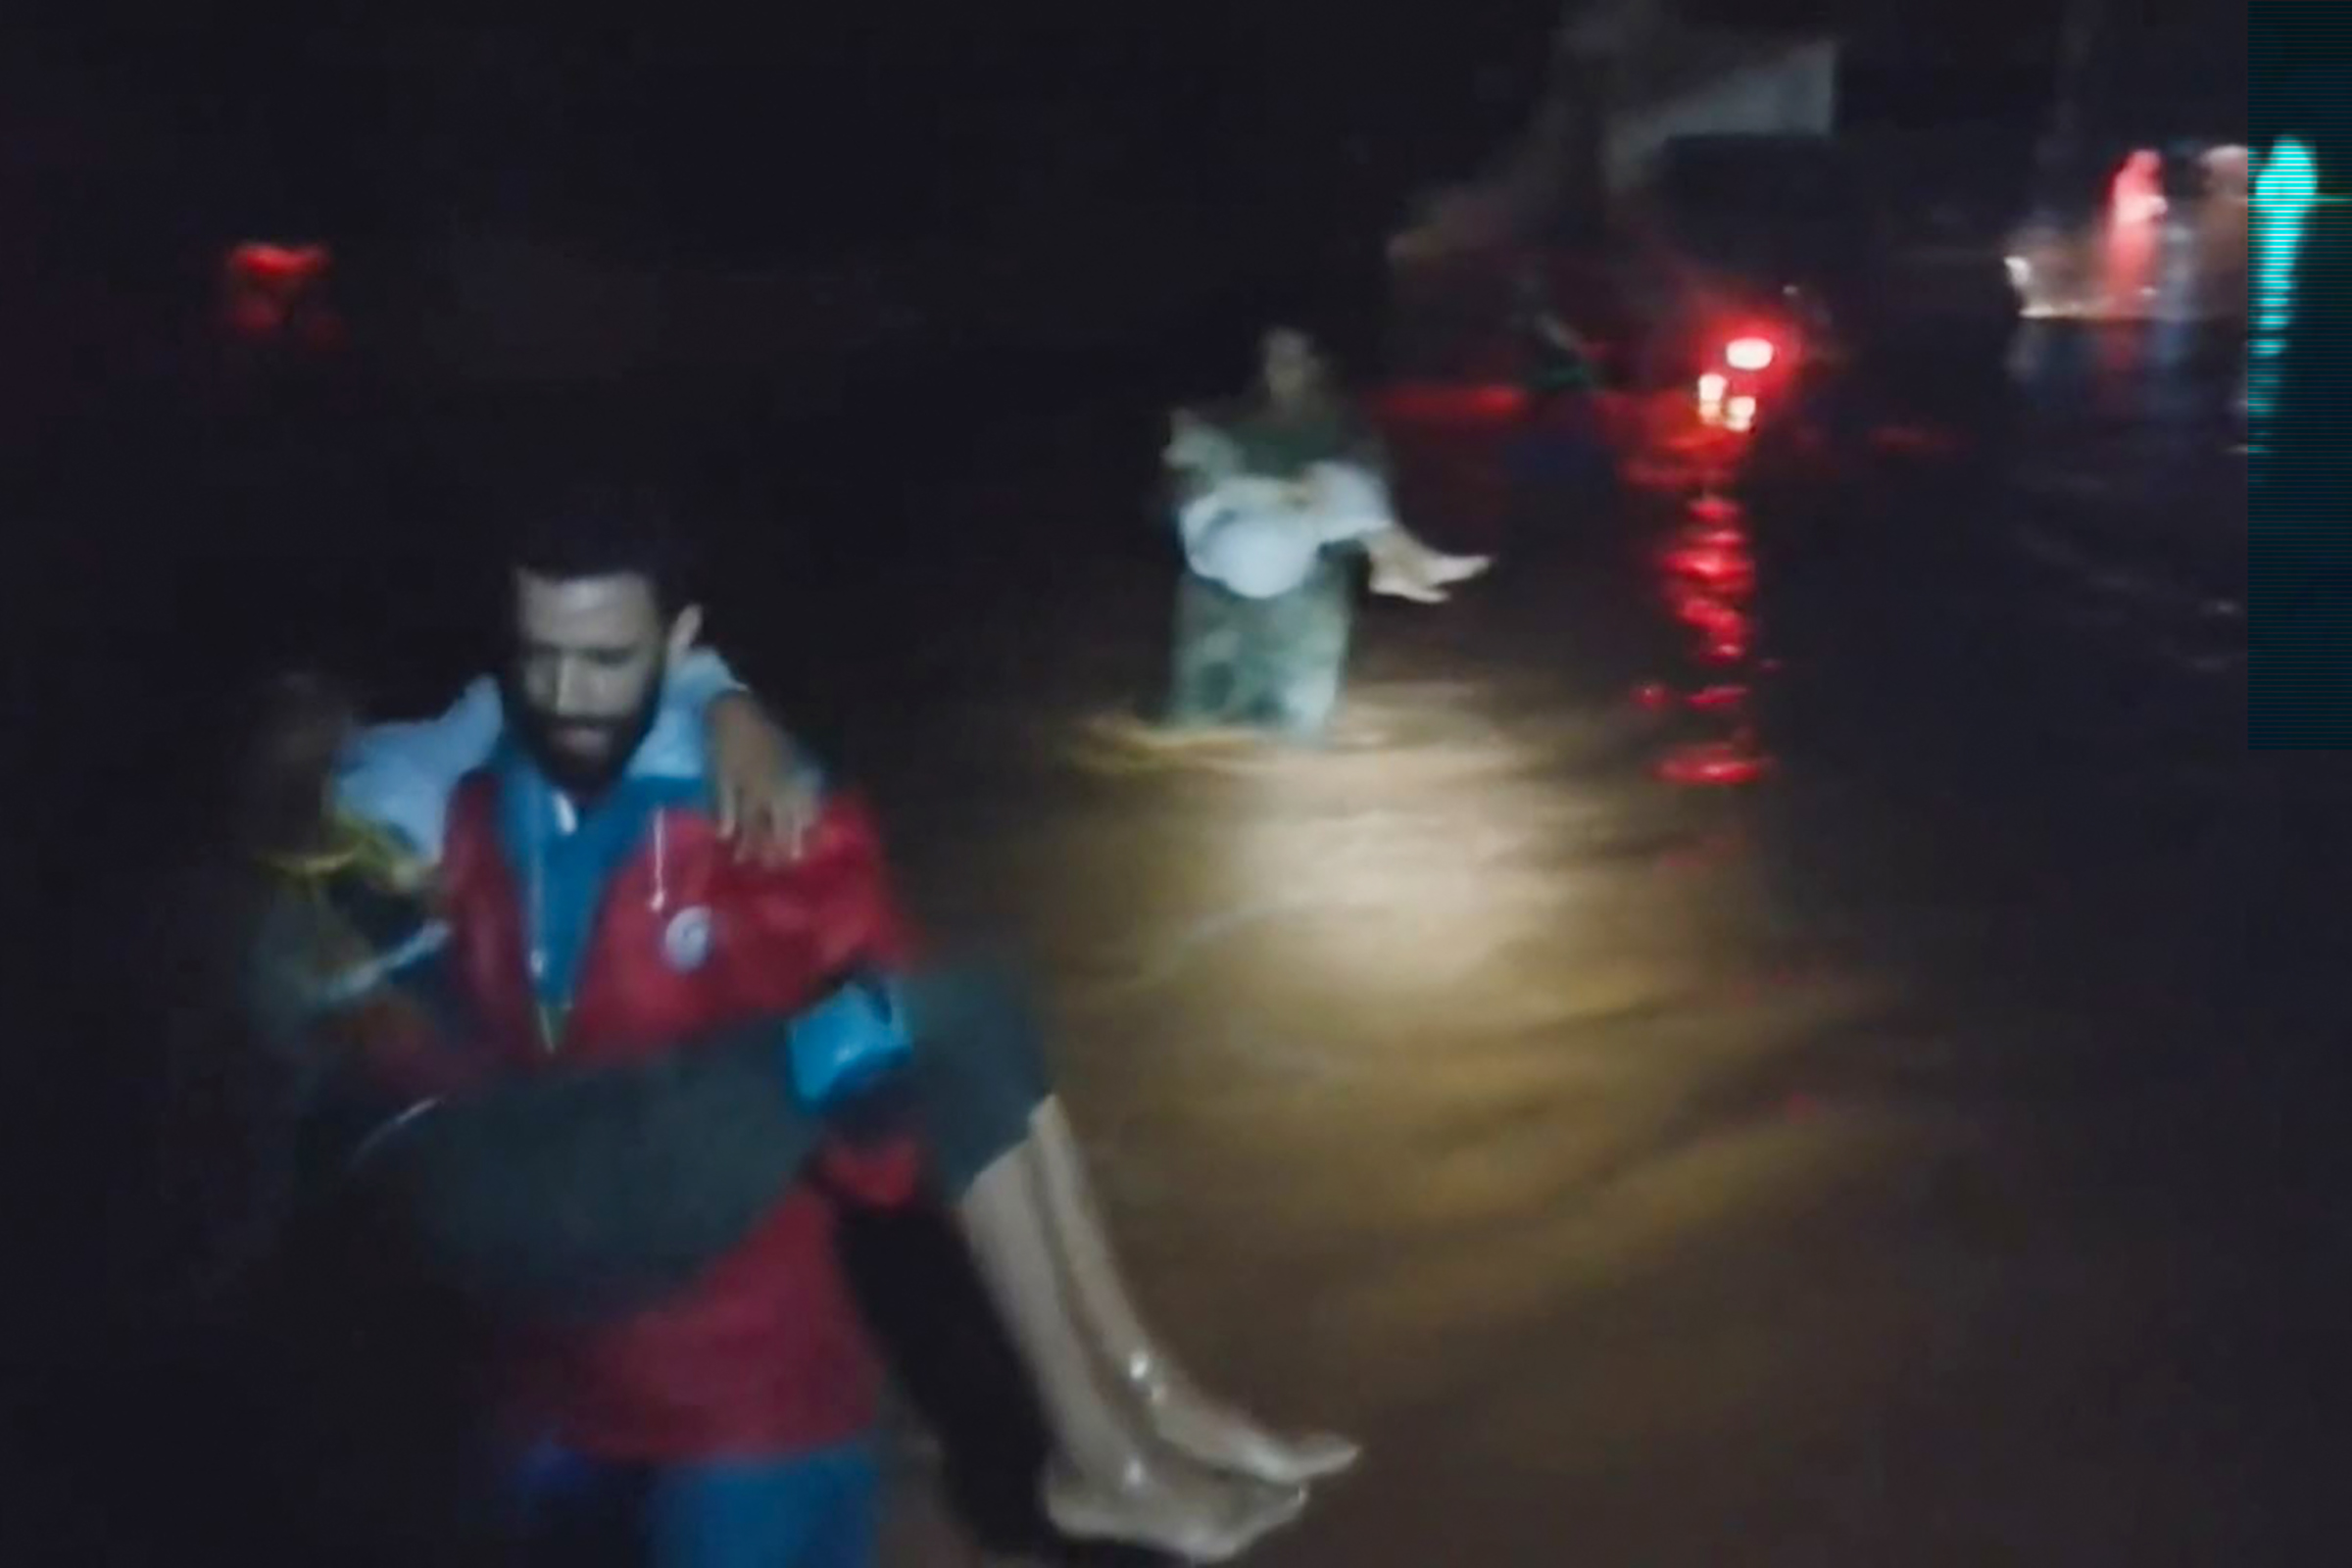 Members of the Libyan Red Crescent rescue people from floods in eastern Libya on Sept. 11.